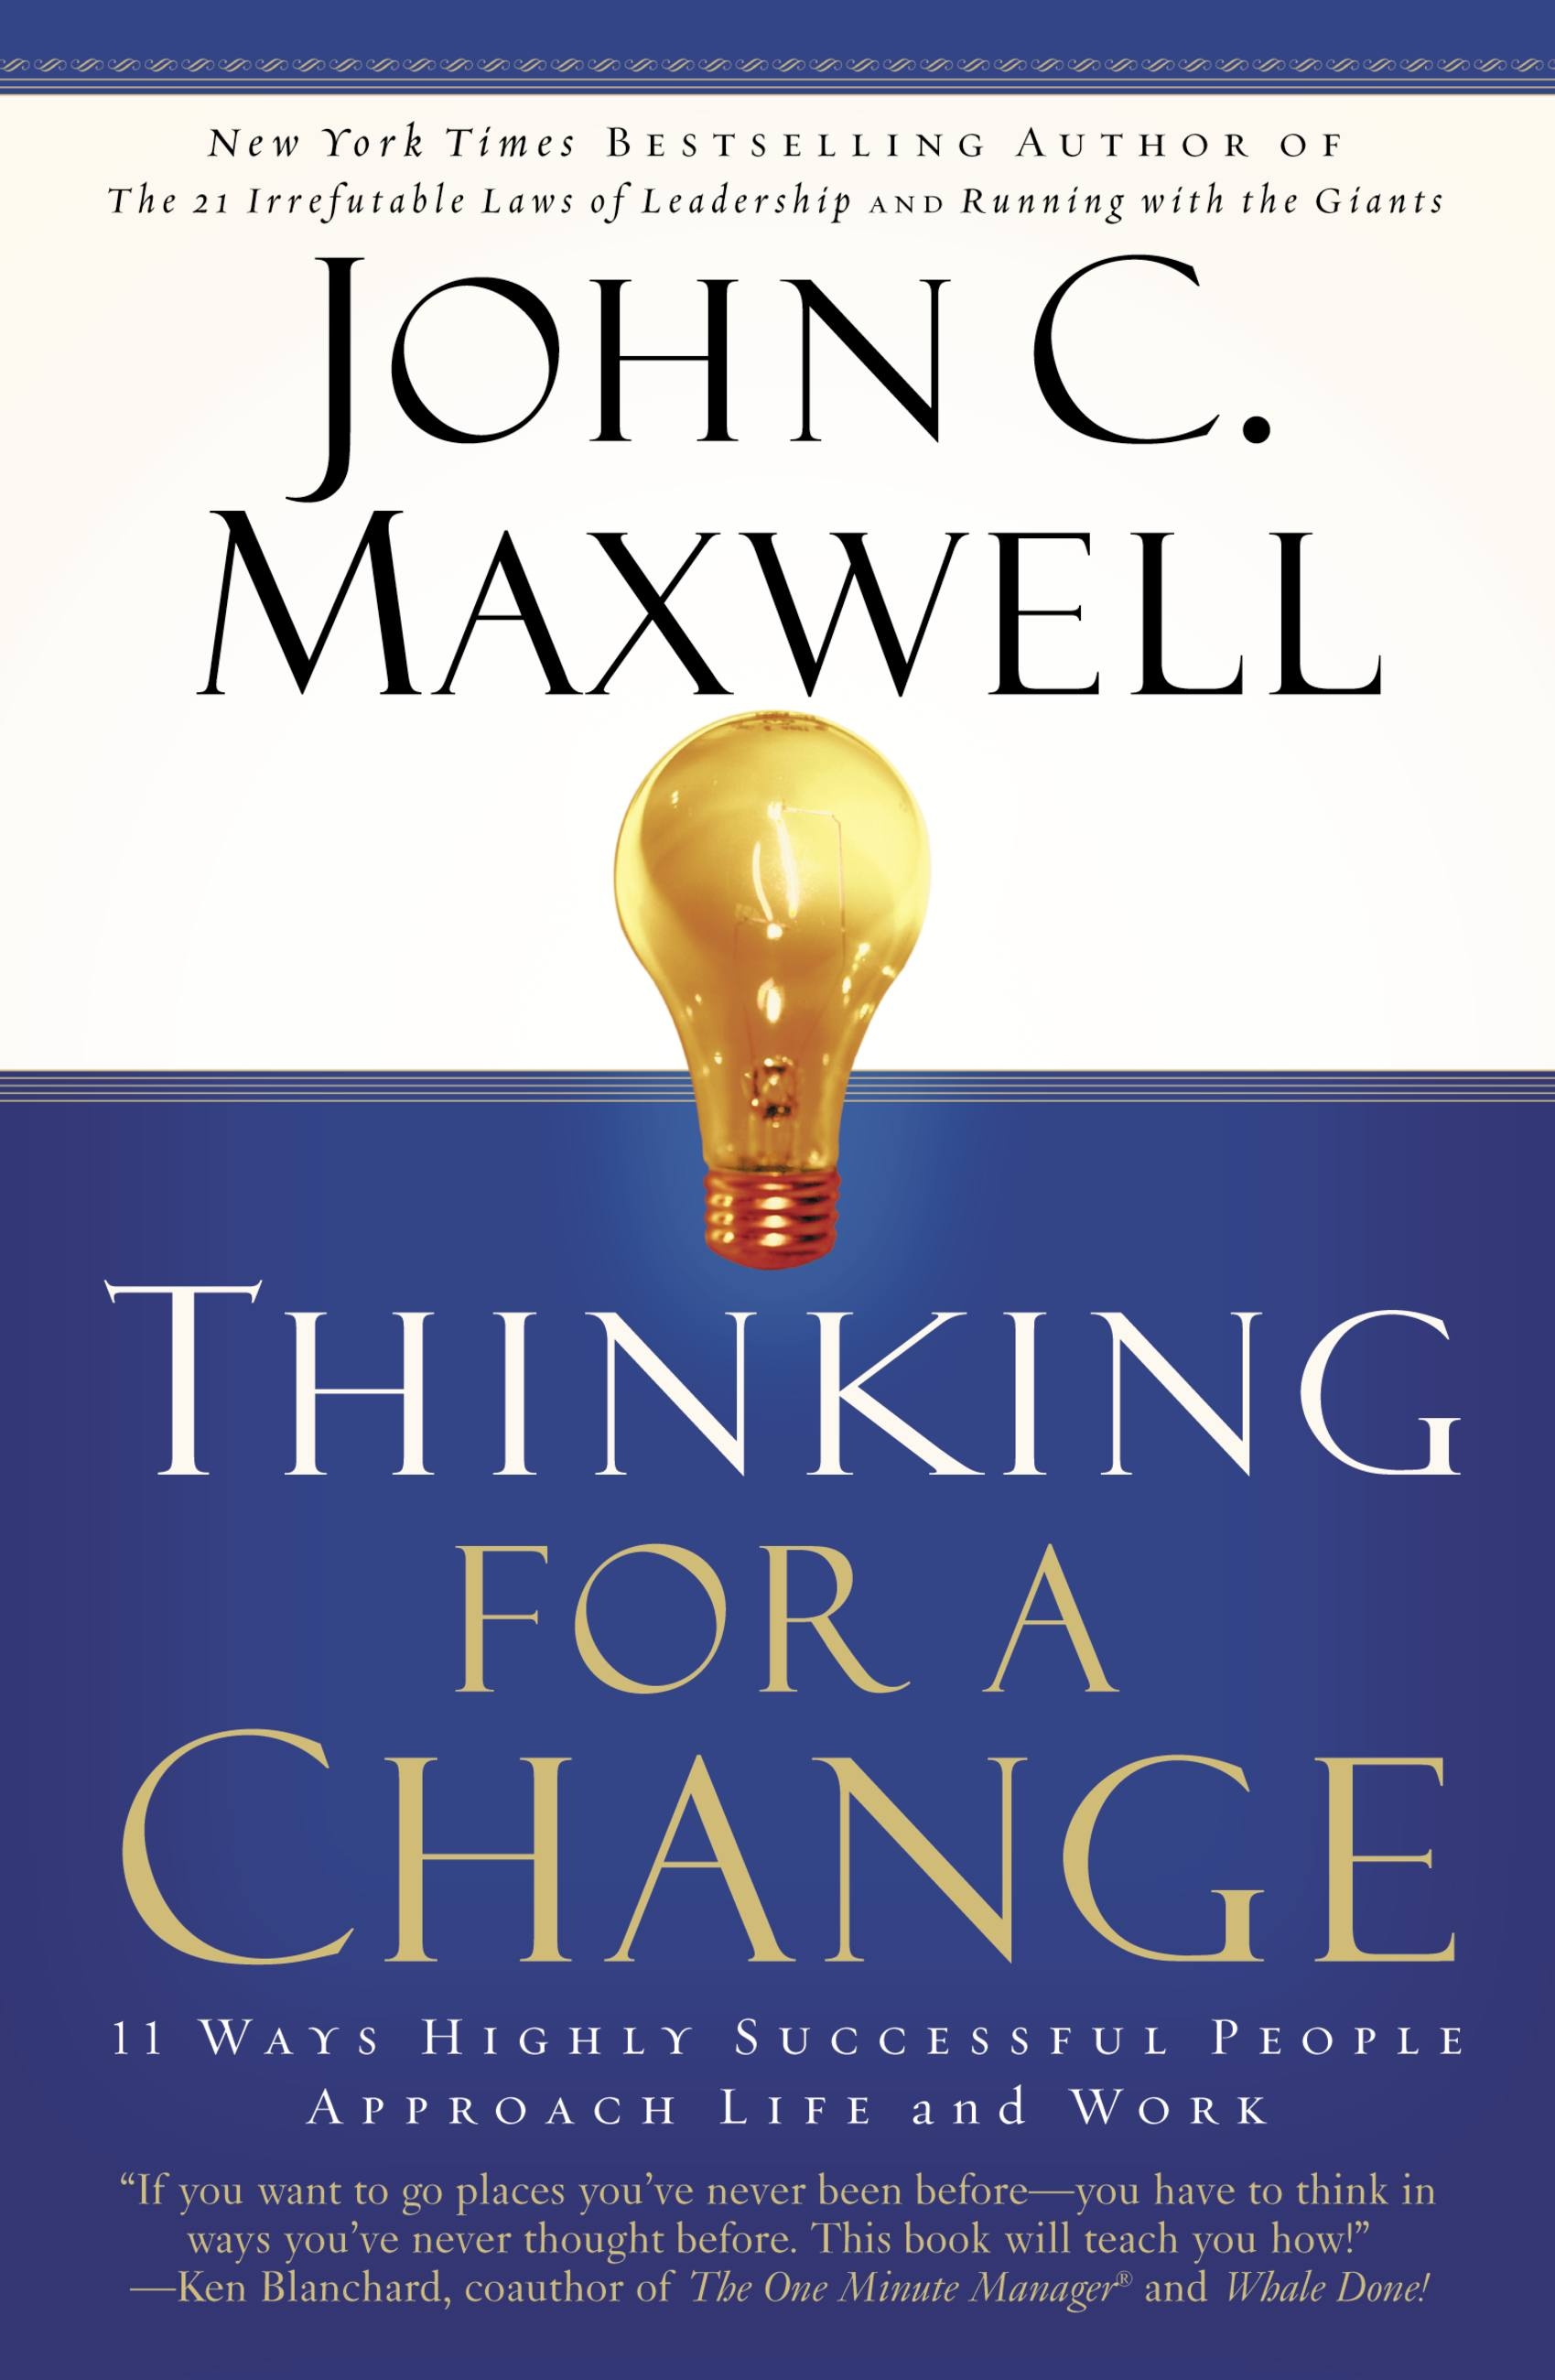 DOWNLOAD PDF: Thinking for a Change by John Maxwell 17